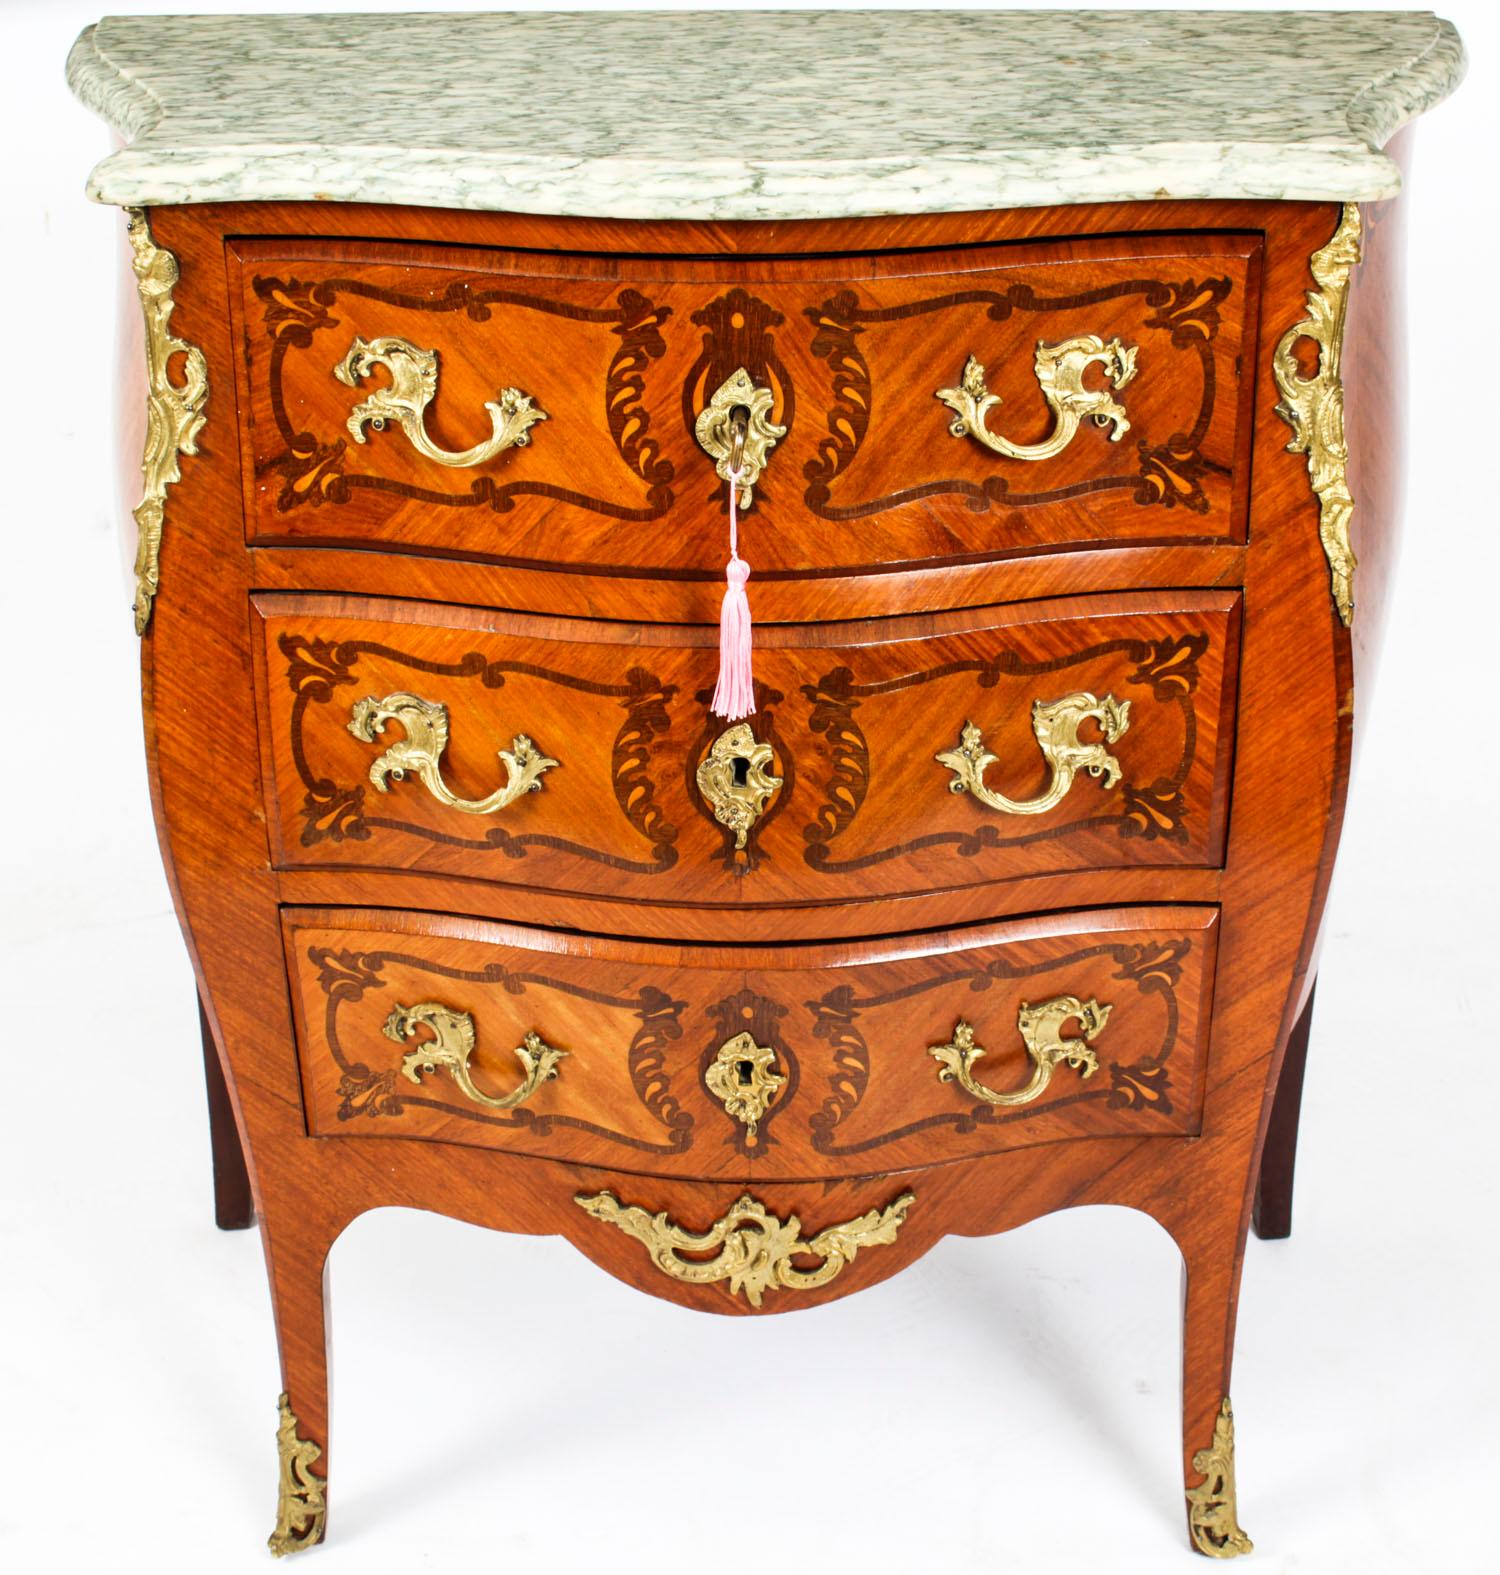 This is a stunning antique French walnut and marquetry Louis Revival serpentine fronted commode, circa 1880 in date. 

This gorgeous commode features a Gris St.Anne shaped marble top above three drawers for ample storage, and was inspired by the